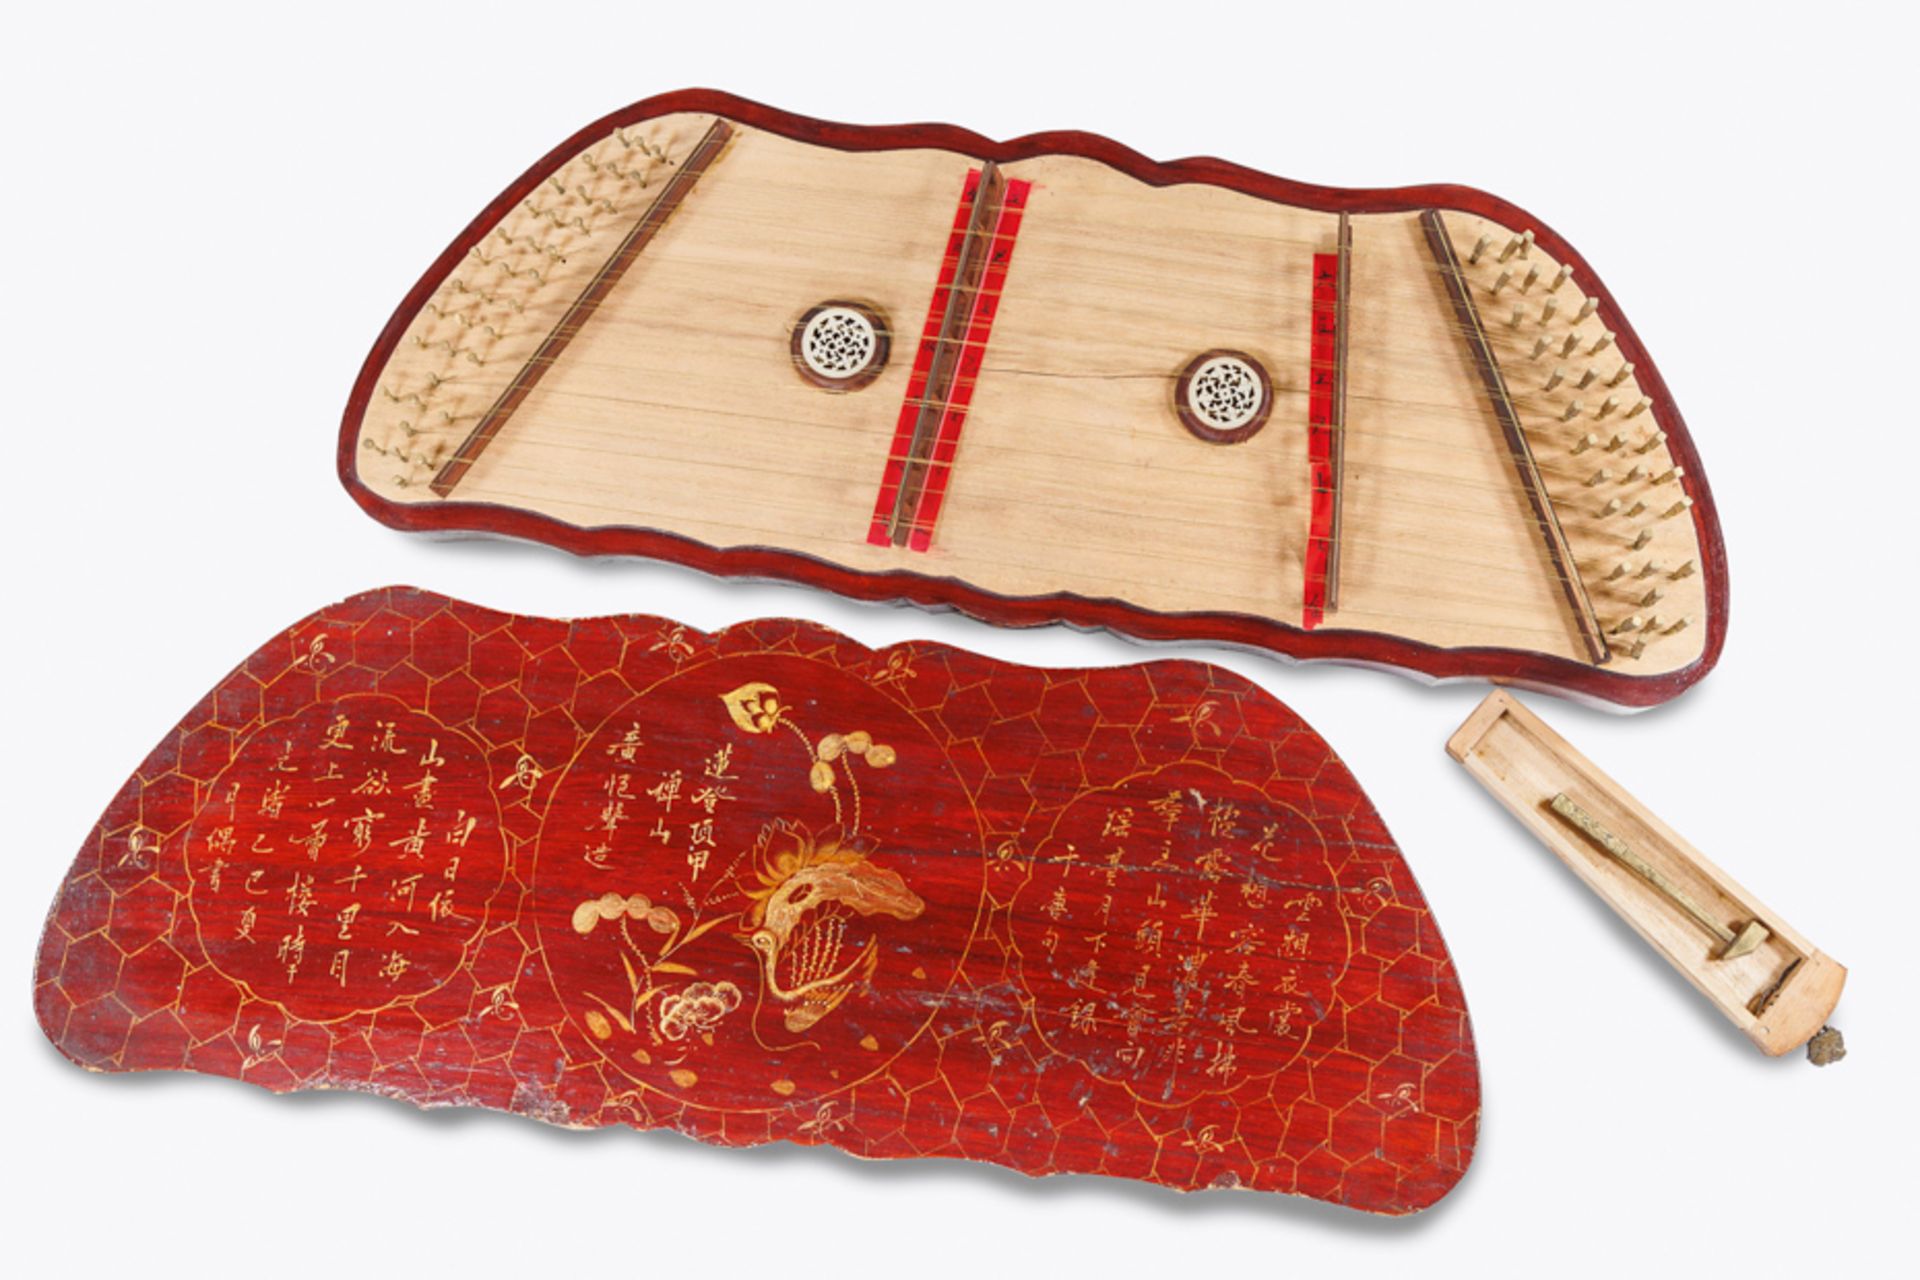 YANG-TJIN ZITHER, CHINA, VERMUTLICH ANFANG BIS MITTE 20. JH.